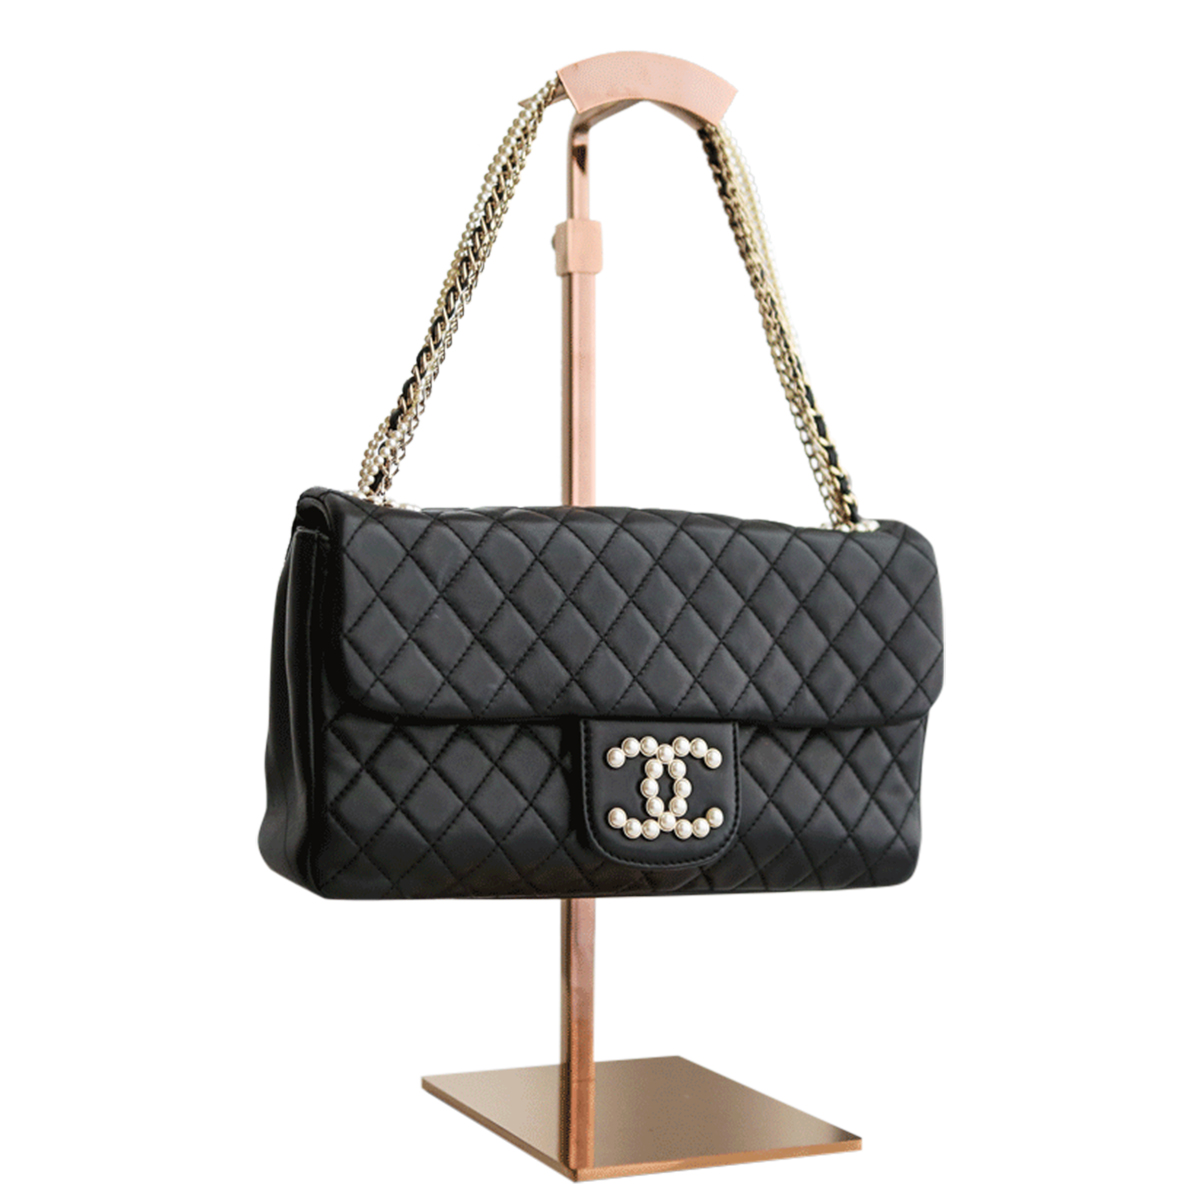 Chanel Flap Bag with Pearl Detail - Janet Mandell